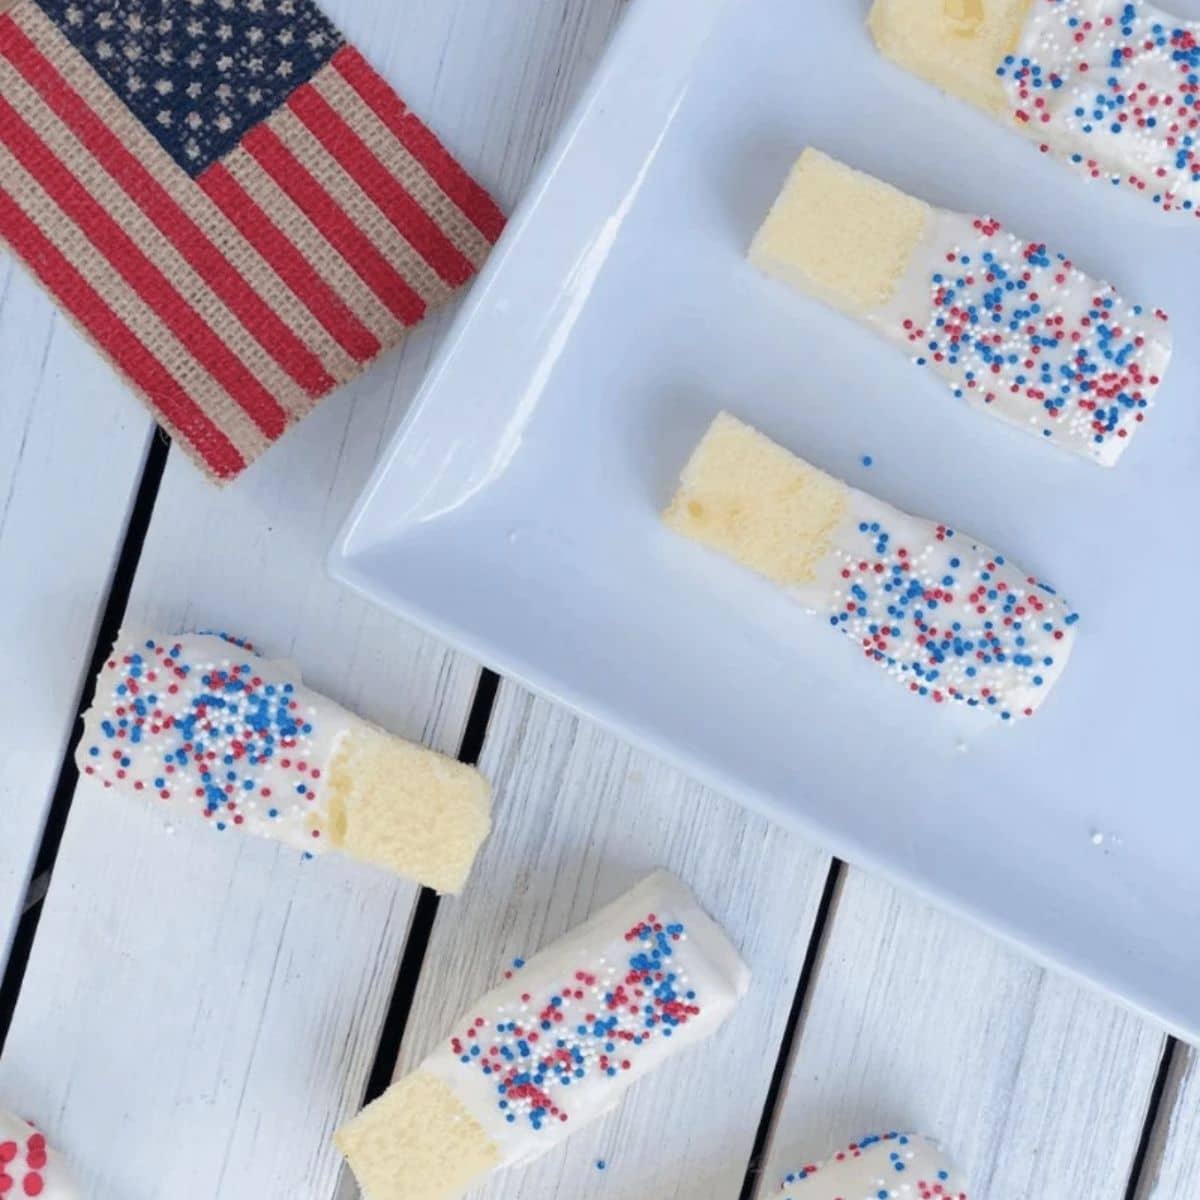 Pound cake slices dipped in white chocolate, and covered in red, white, and blue sprinkles.
